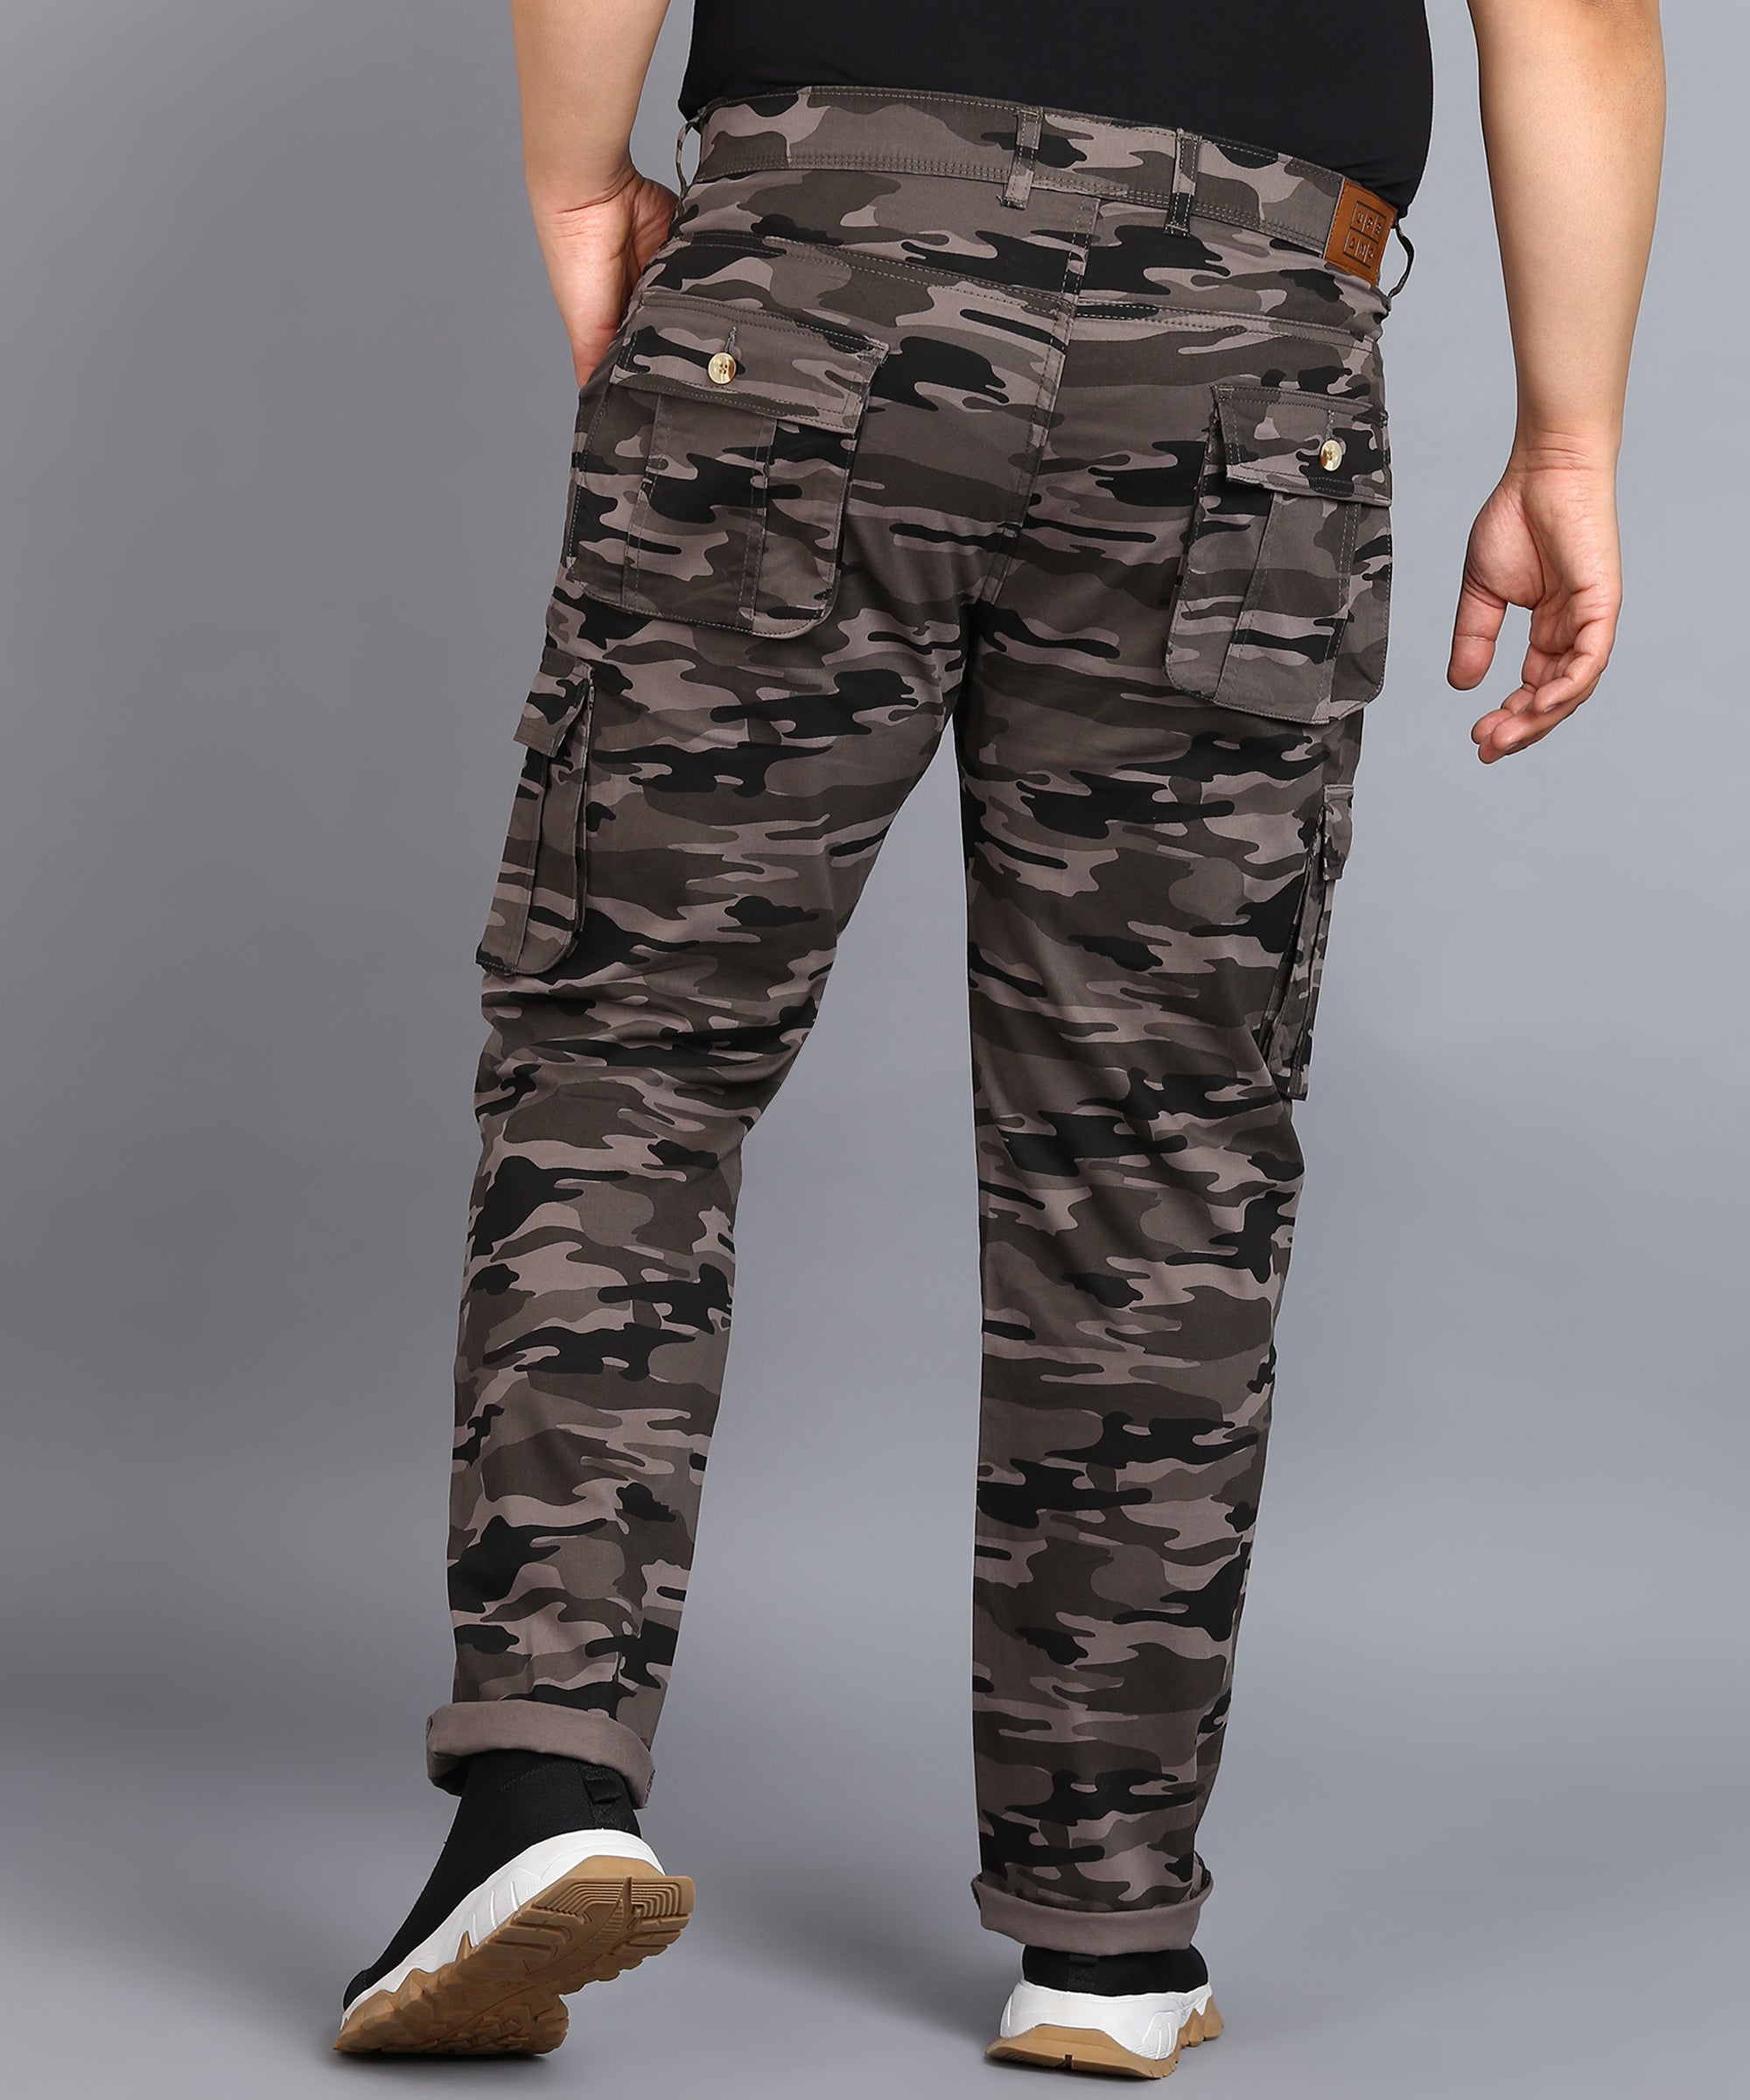 Urbano Plus Men's Navy Blue Regular Fit Military Camouflage Cargo Chino Pant with 6 Pockets